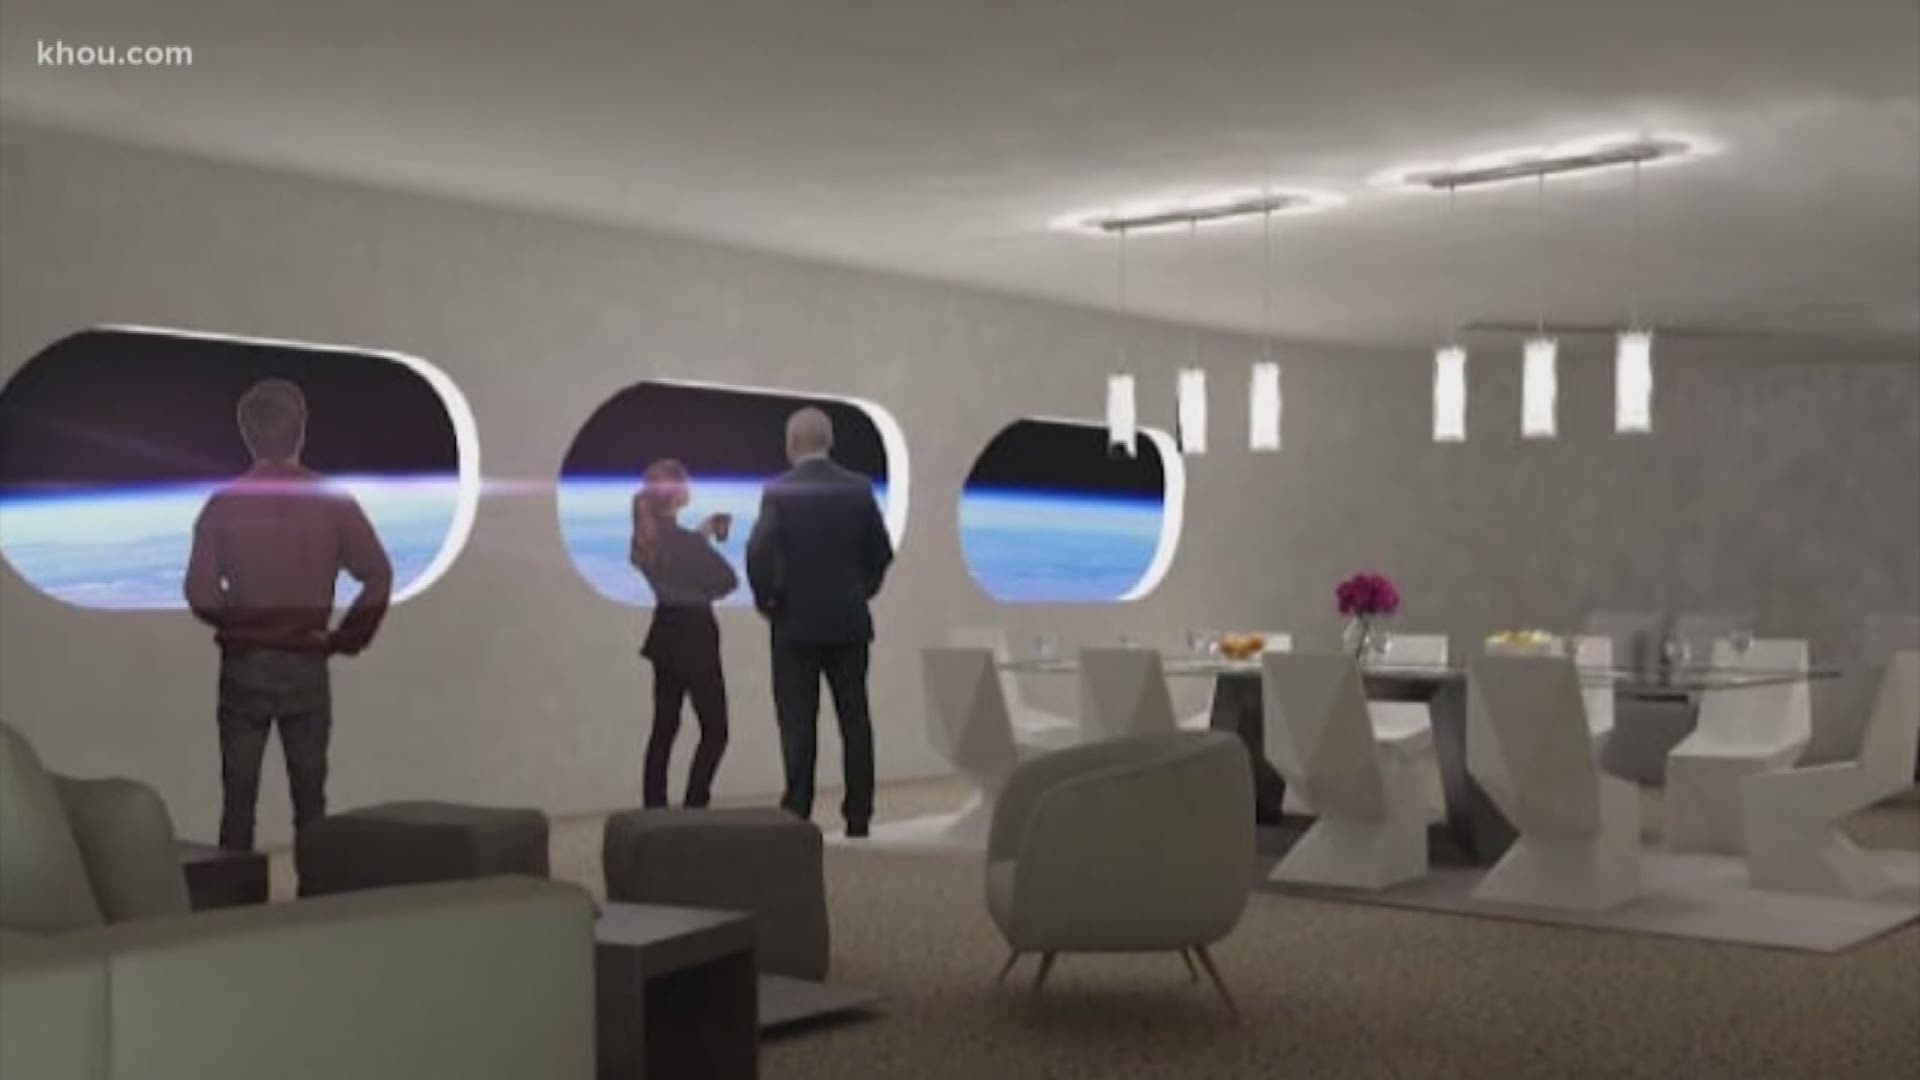 A California company hopes within the next decade, space could be your next vacation destination.